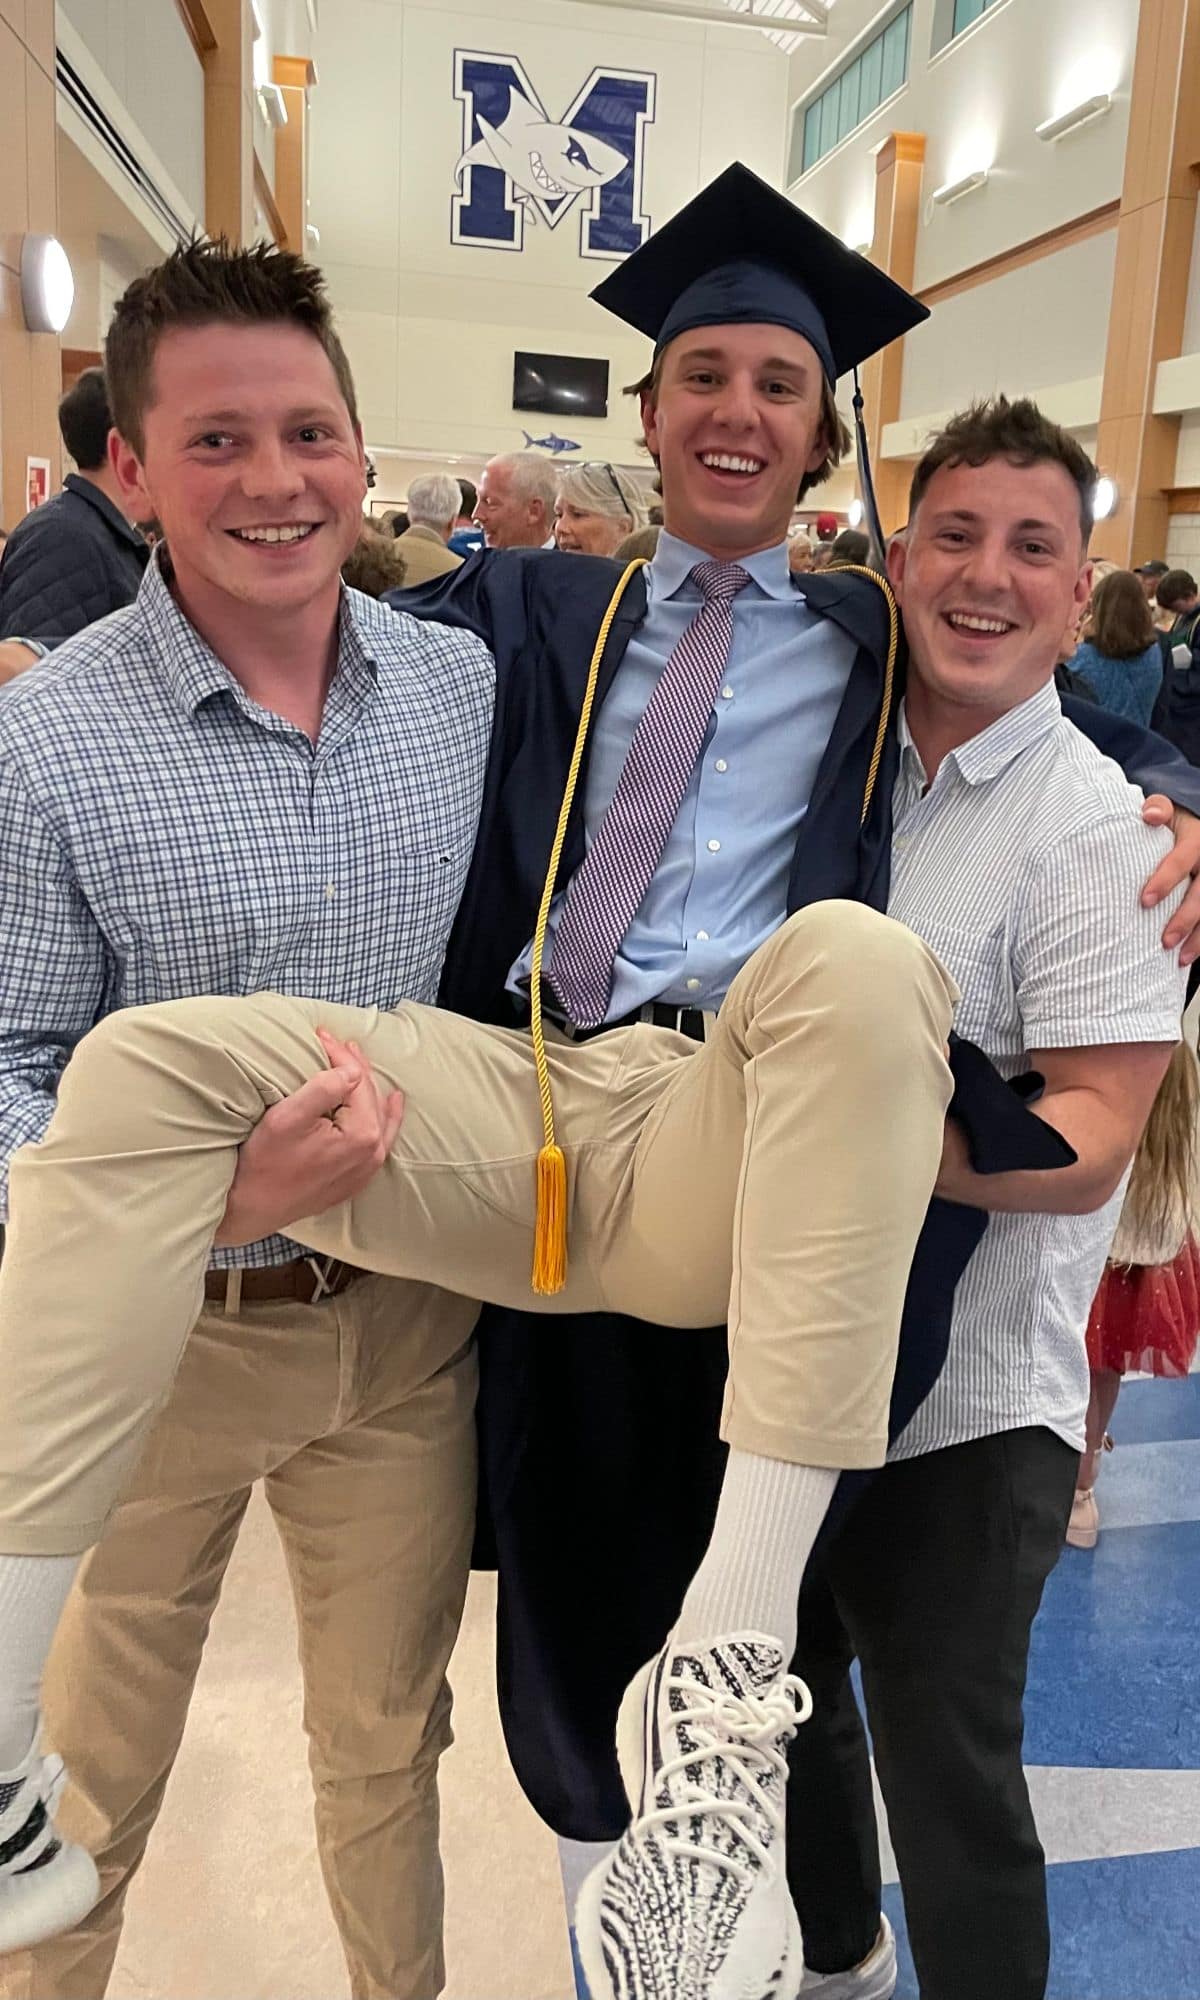 The Archibald brothers, Jack, Wyatt and Cameron, celebrate Wyatt’s high school graduation and his plan to join them at Embry-Riddle. (Photo: Cameron Archibald)